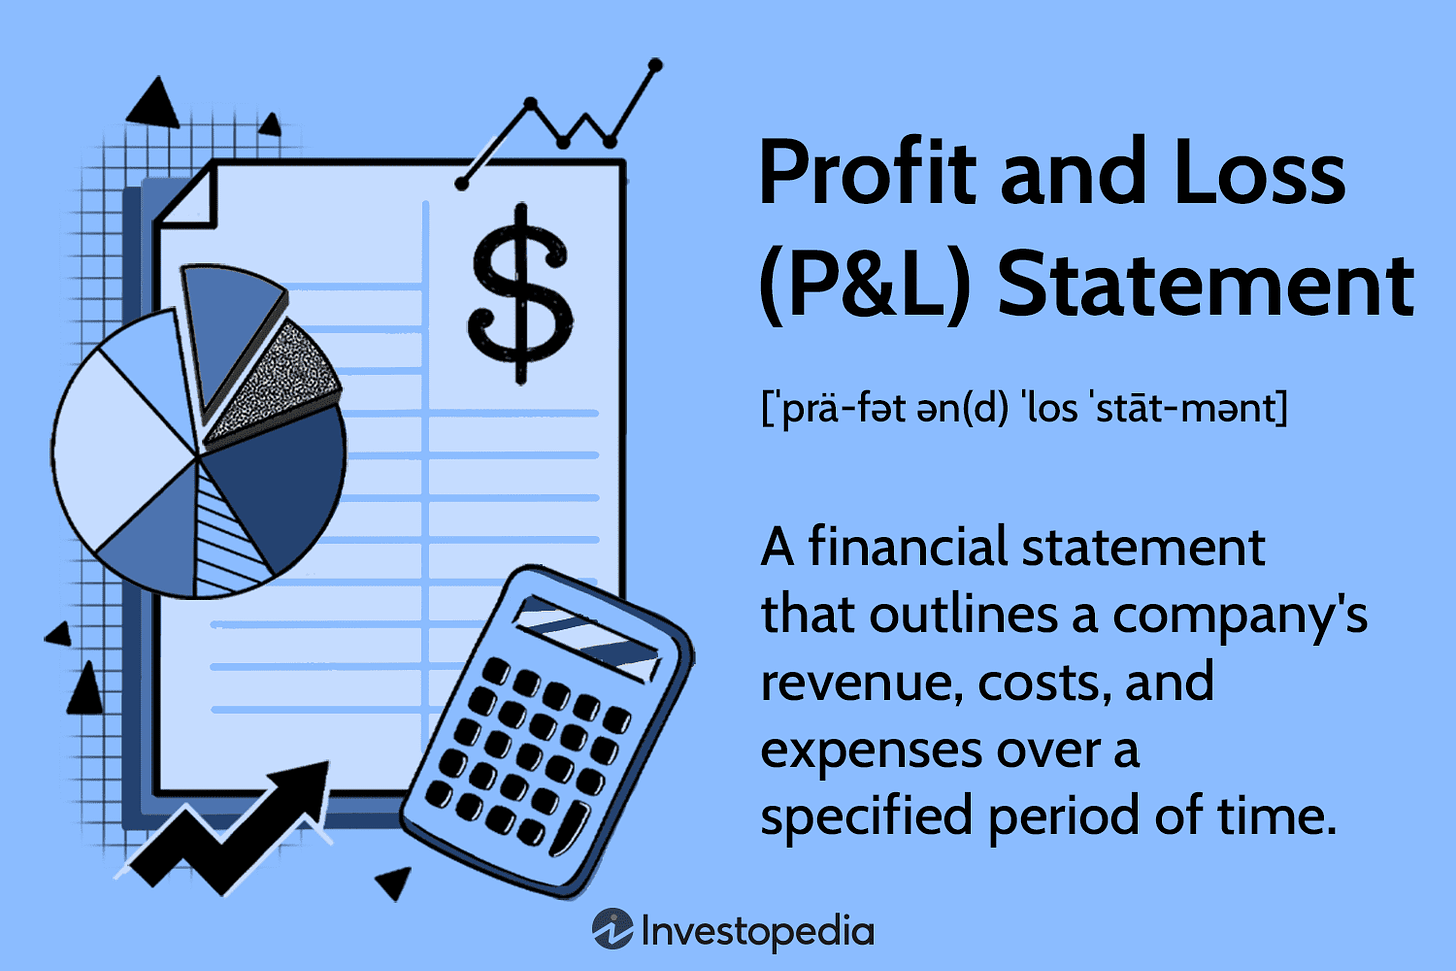 Profit and Loss Statement Meaning, Importance, Types, and Examples